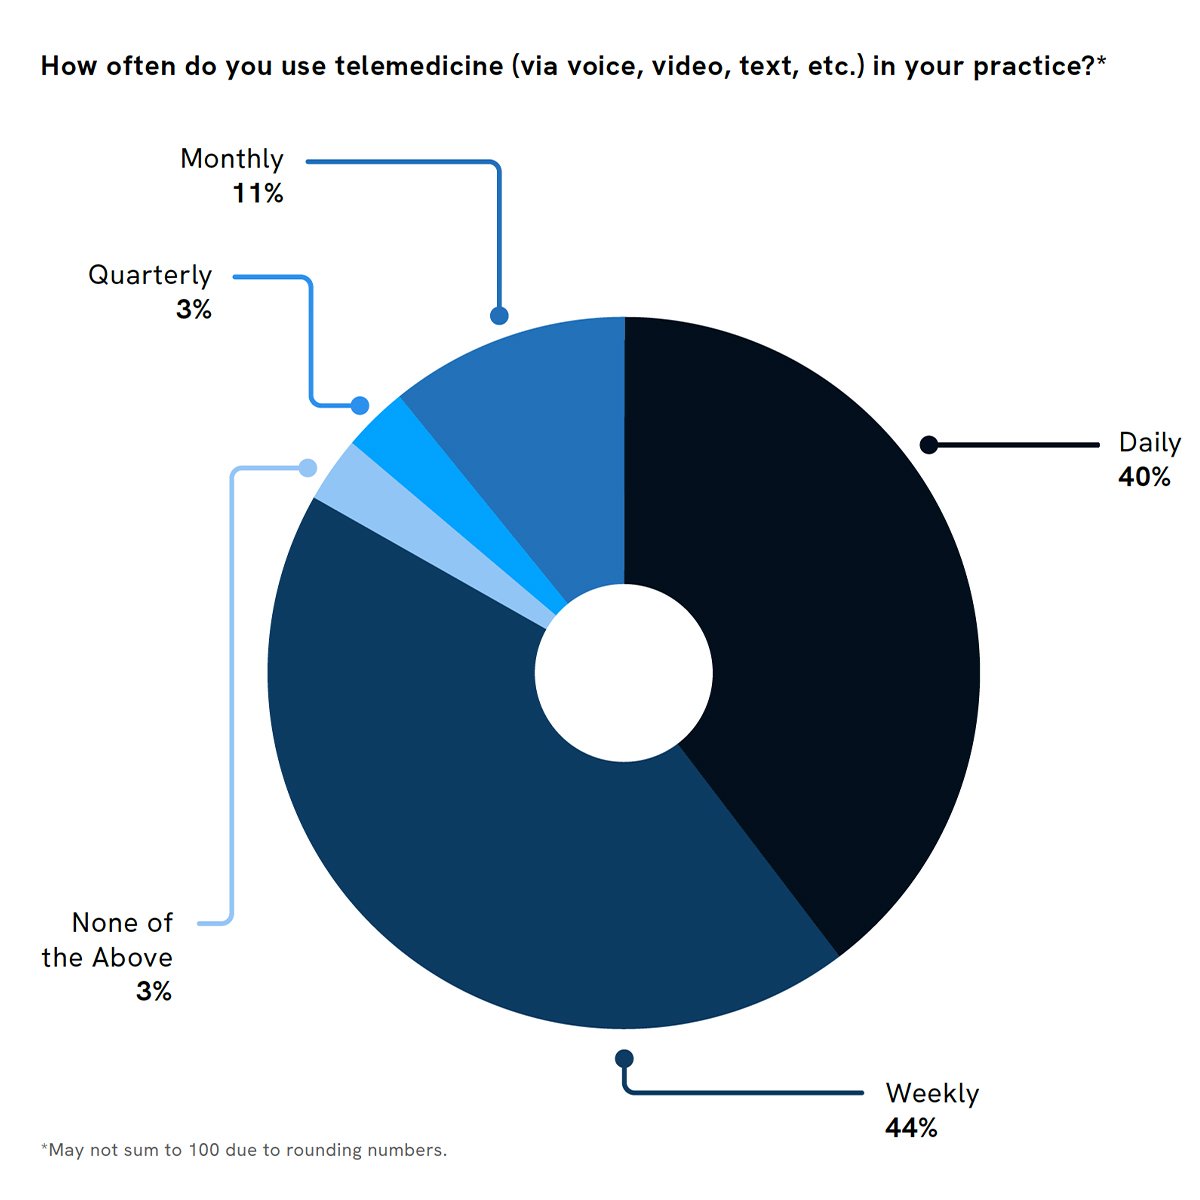 dox_blog_image_th_report_piechart_question (2)